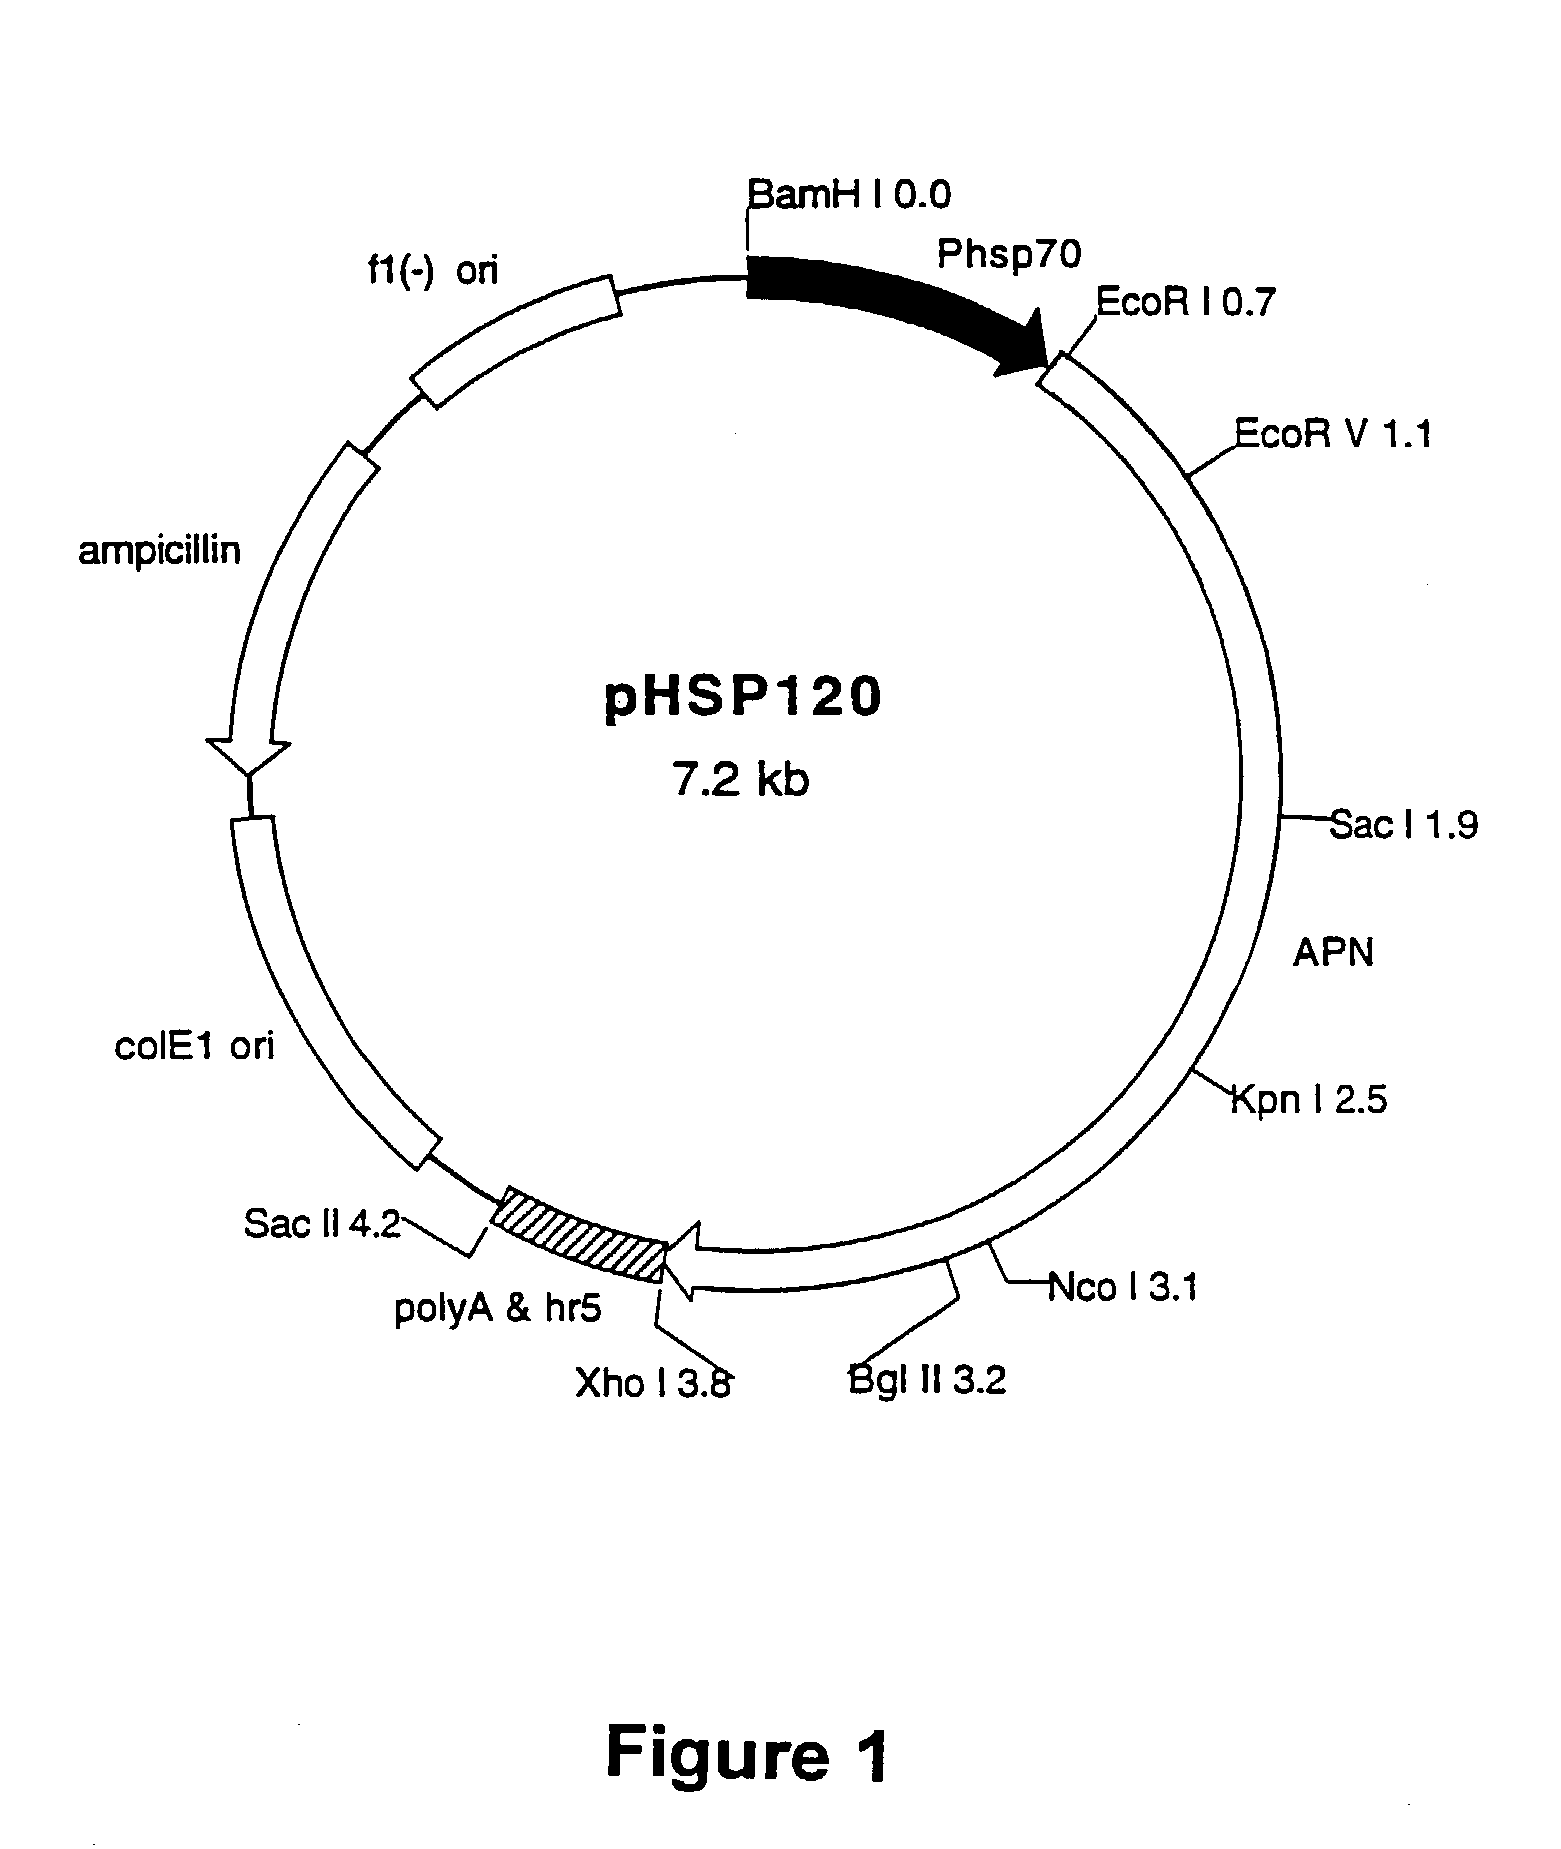 Methods and materials for identifying novel pesticide agents